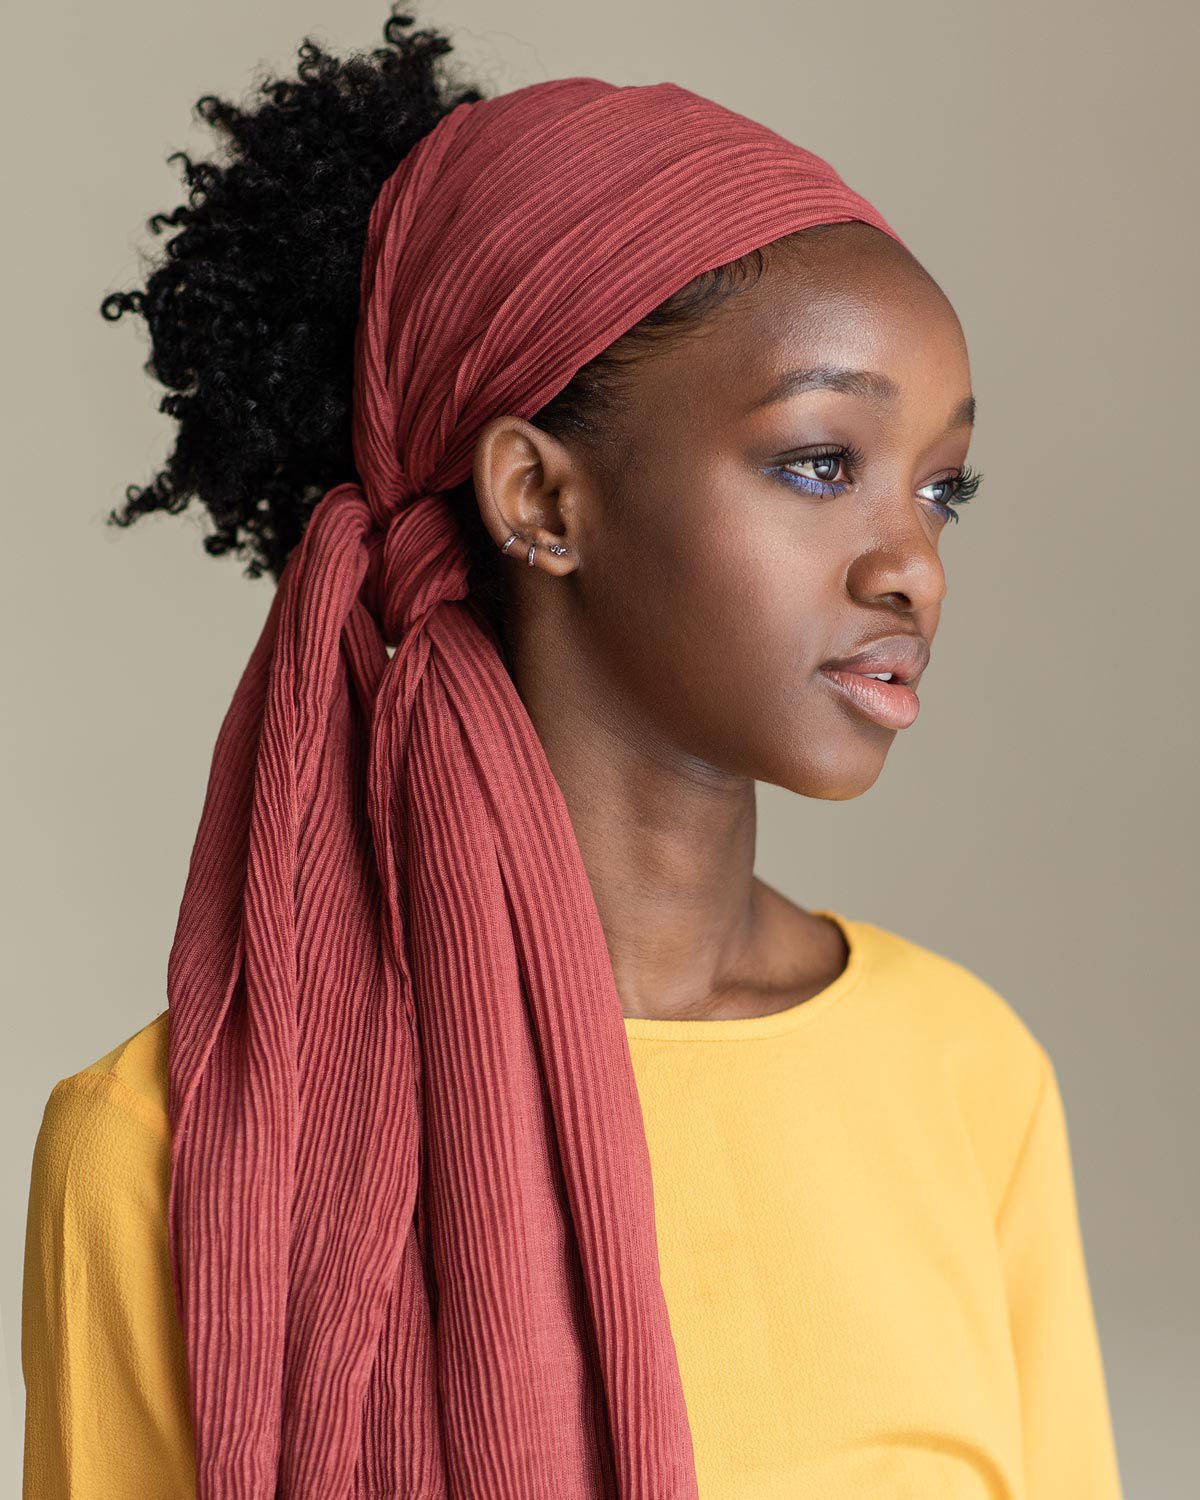 How To Tie A Head Wrap With Braids References Hotelritchey Riset